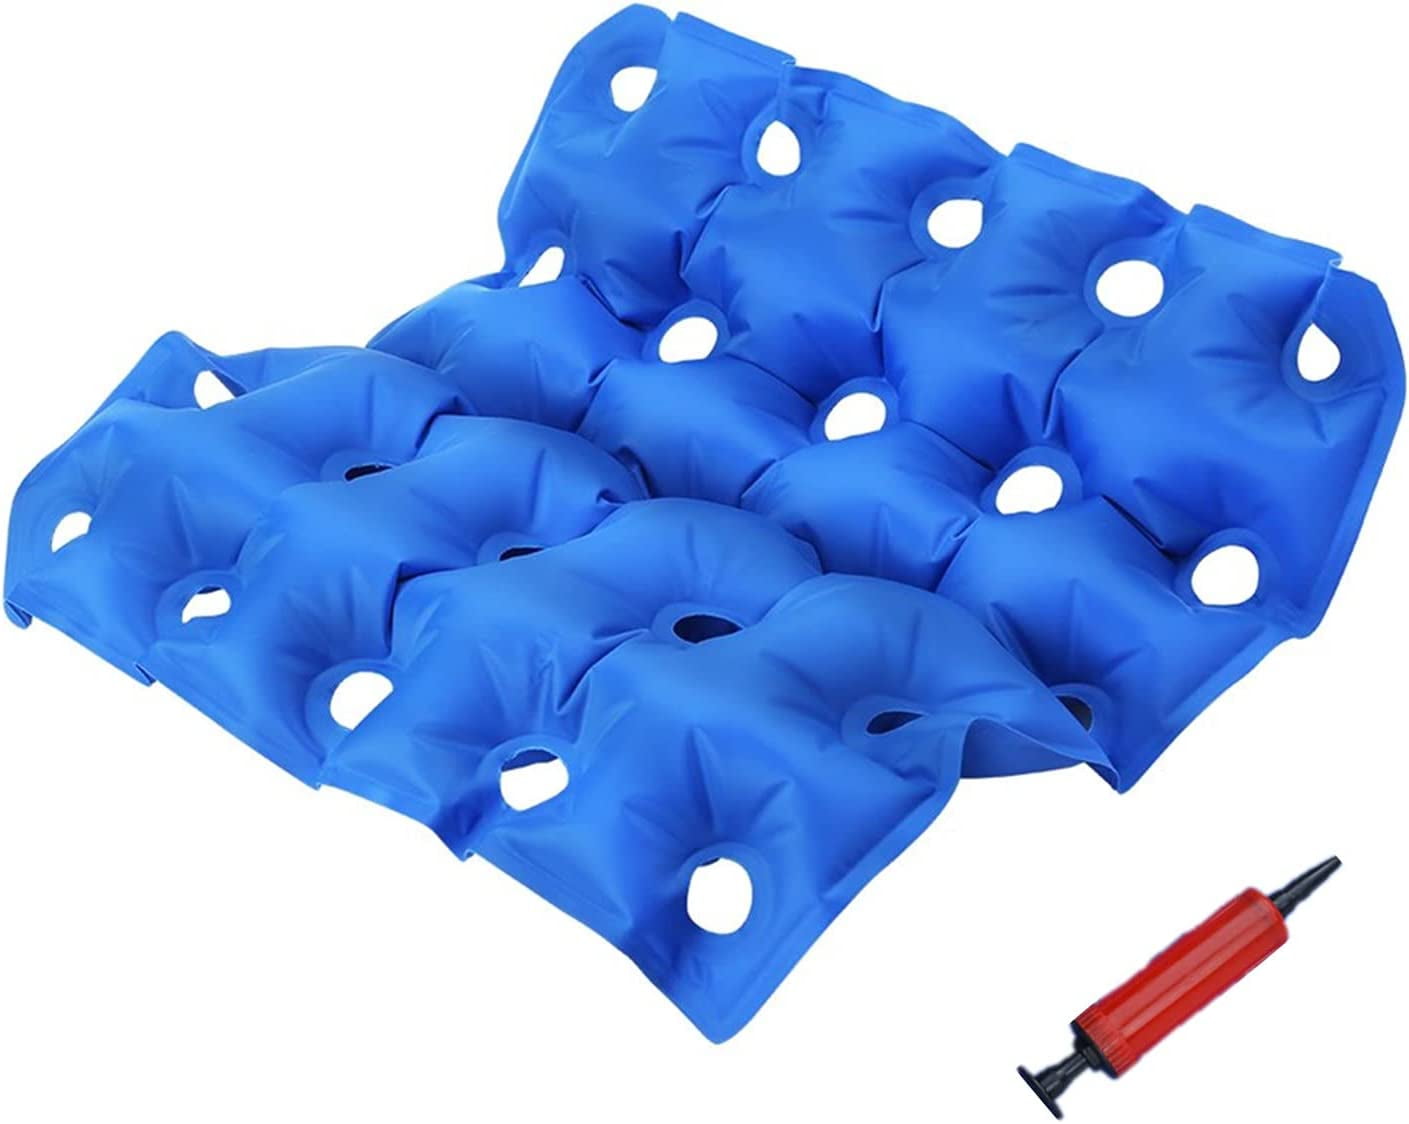 Happon 1 Pack Wheelchair Cushion for Pressure Sores - Bed Sore Cushions for  Butt for Recliner - Pressure Sore Cushions for Sitting in Recliner - Blue  Inflatable Wheelchair Pad for Pressure Relief 